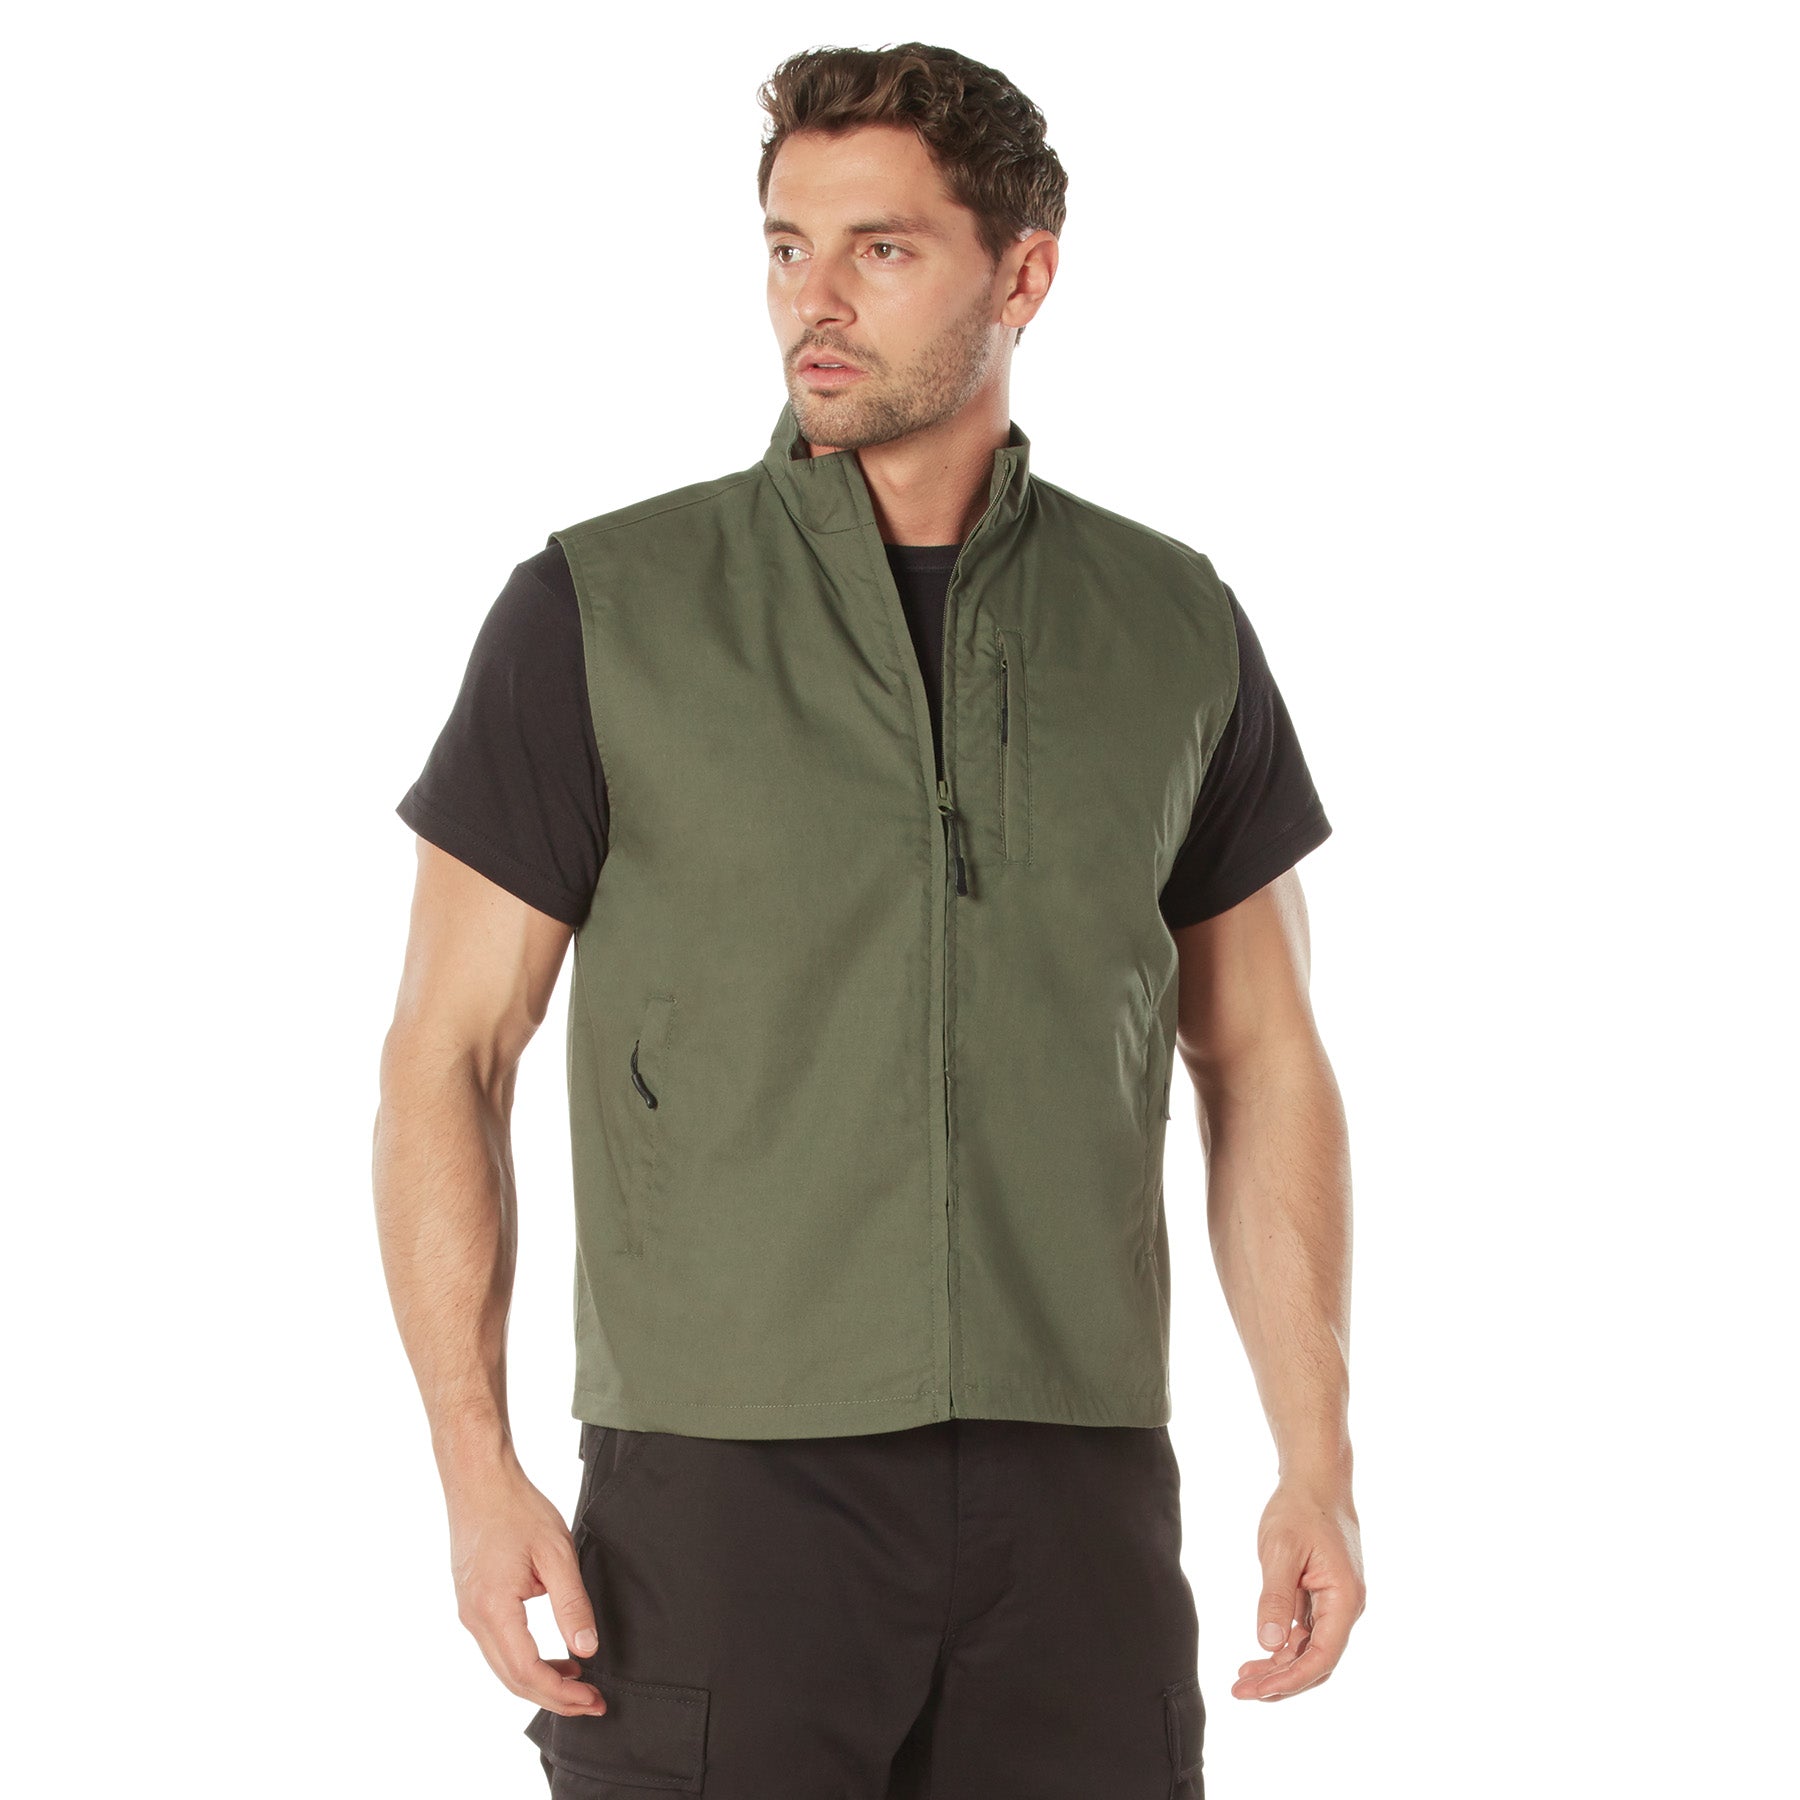 Rothco Undercover Travel Vest - Tactical Choice Plus